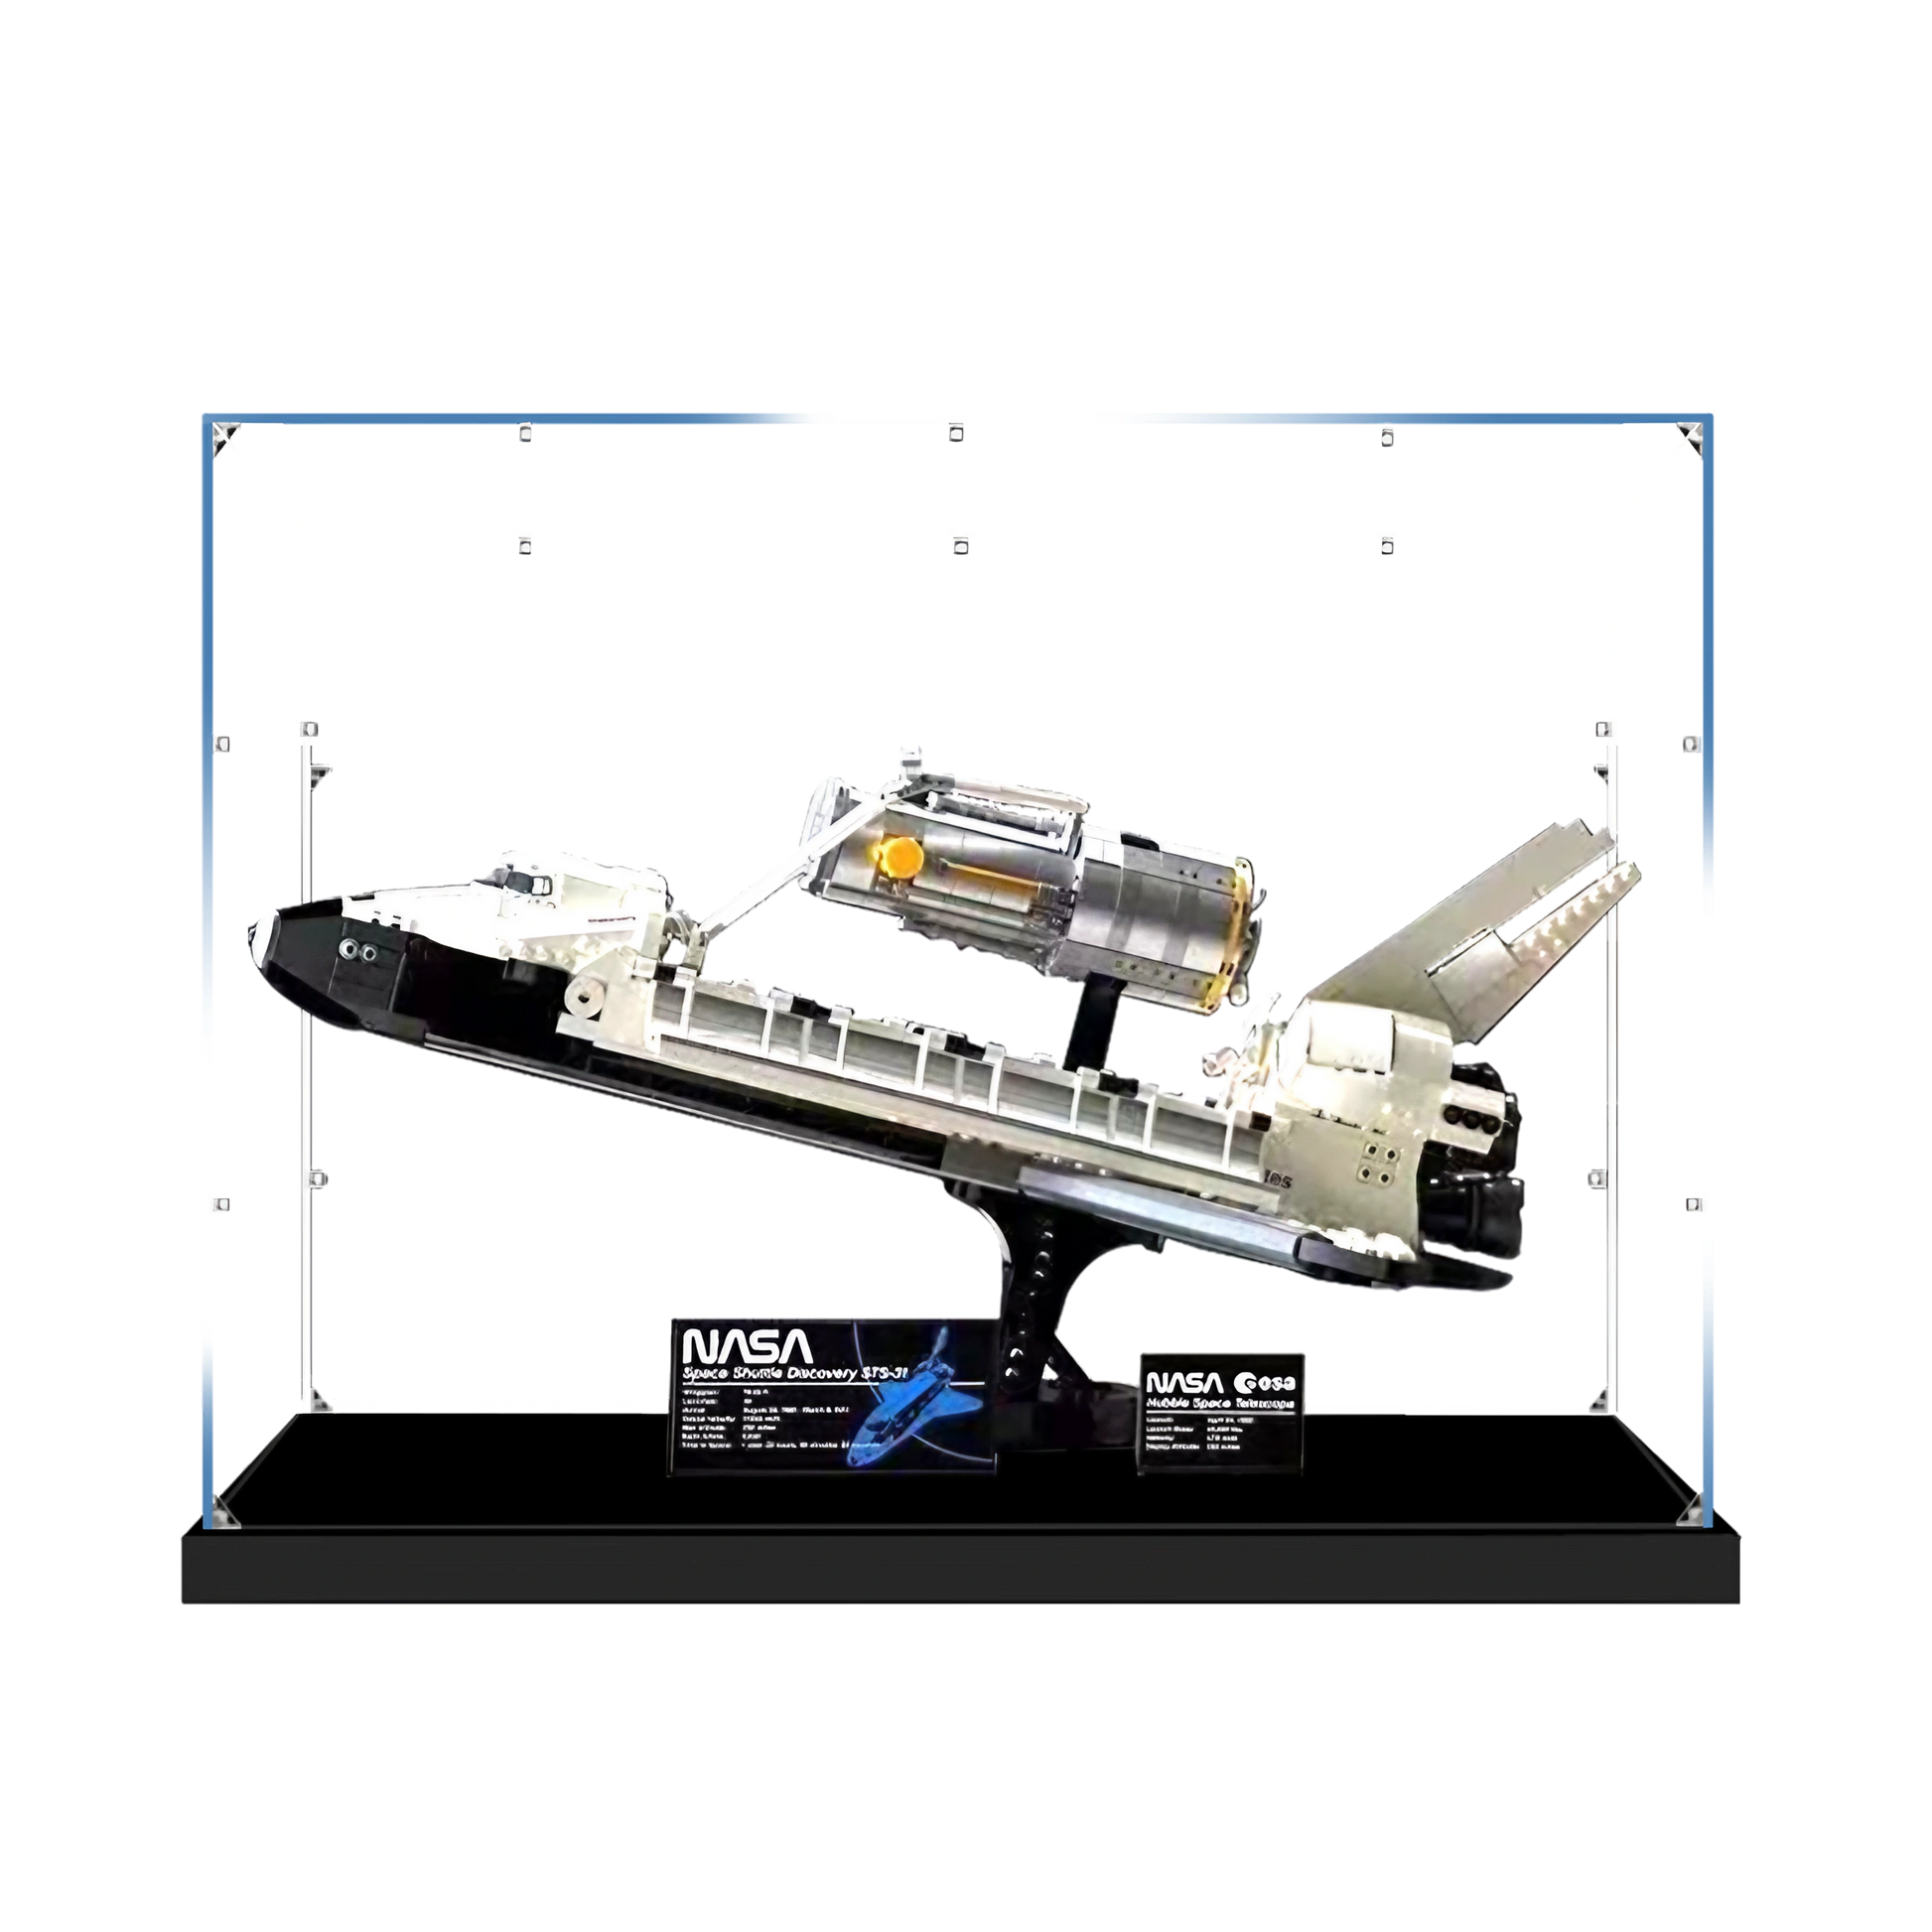 NASA Space Shuttle Discovery Display Case - Buy from Kingdom Brick